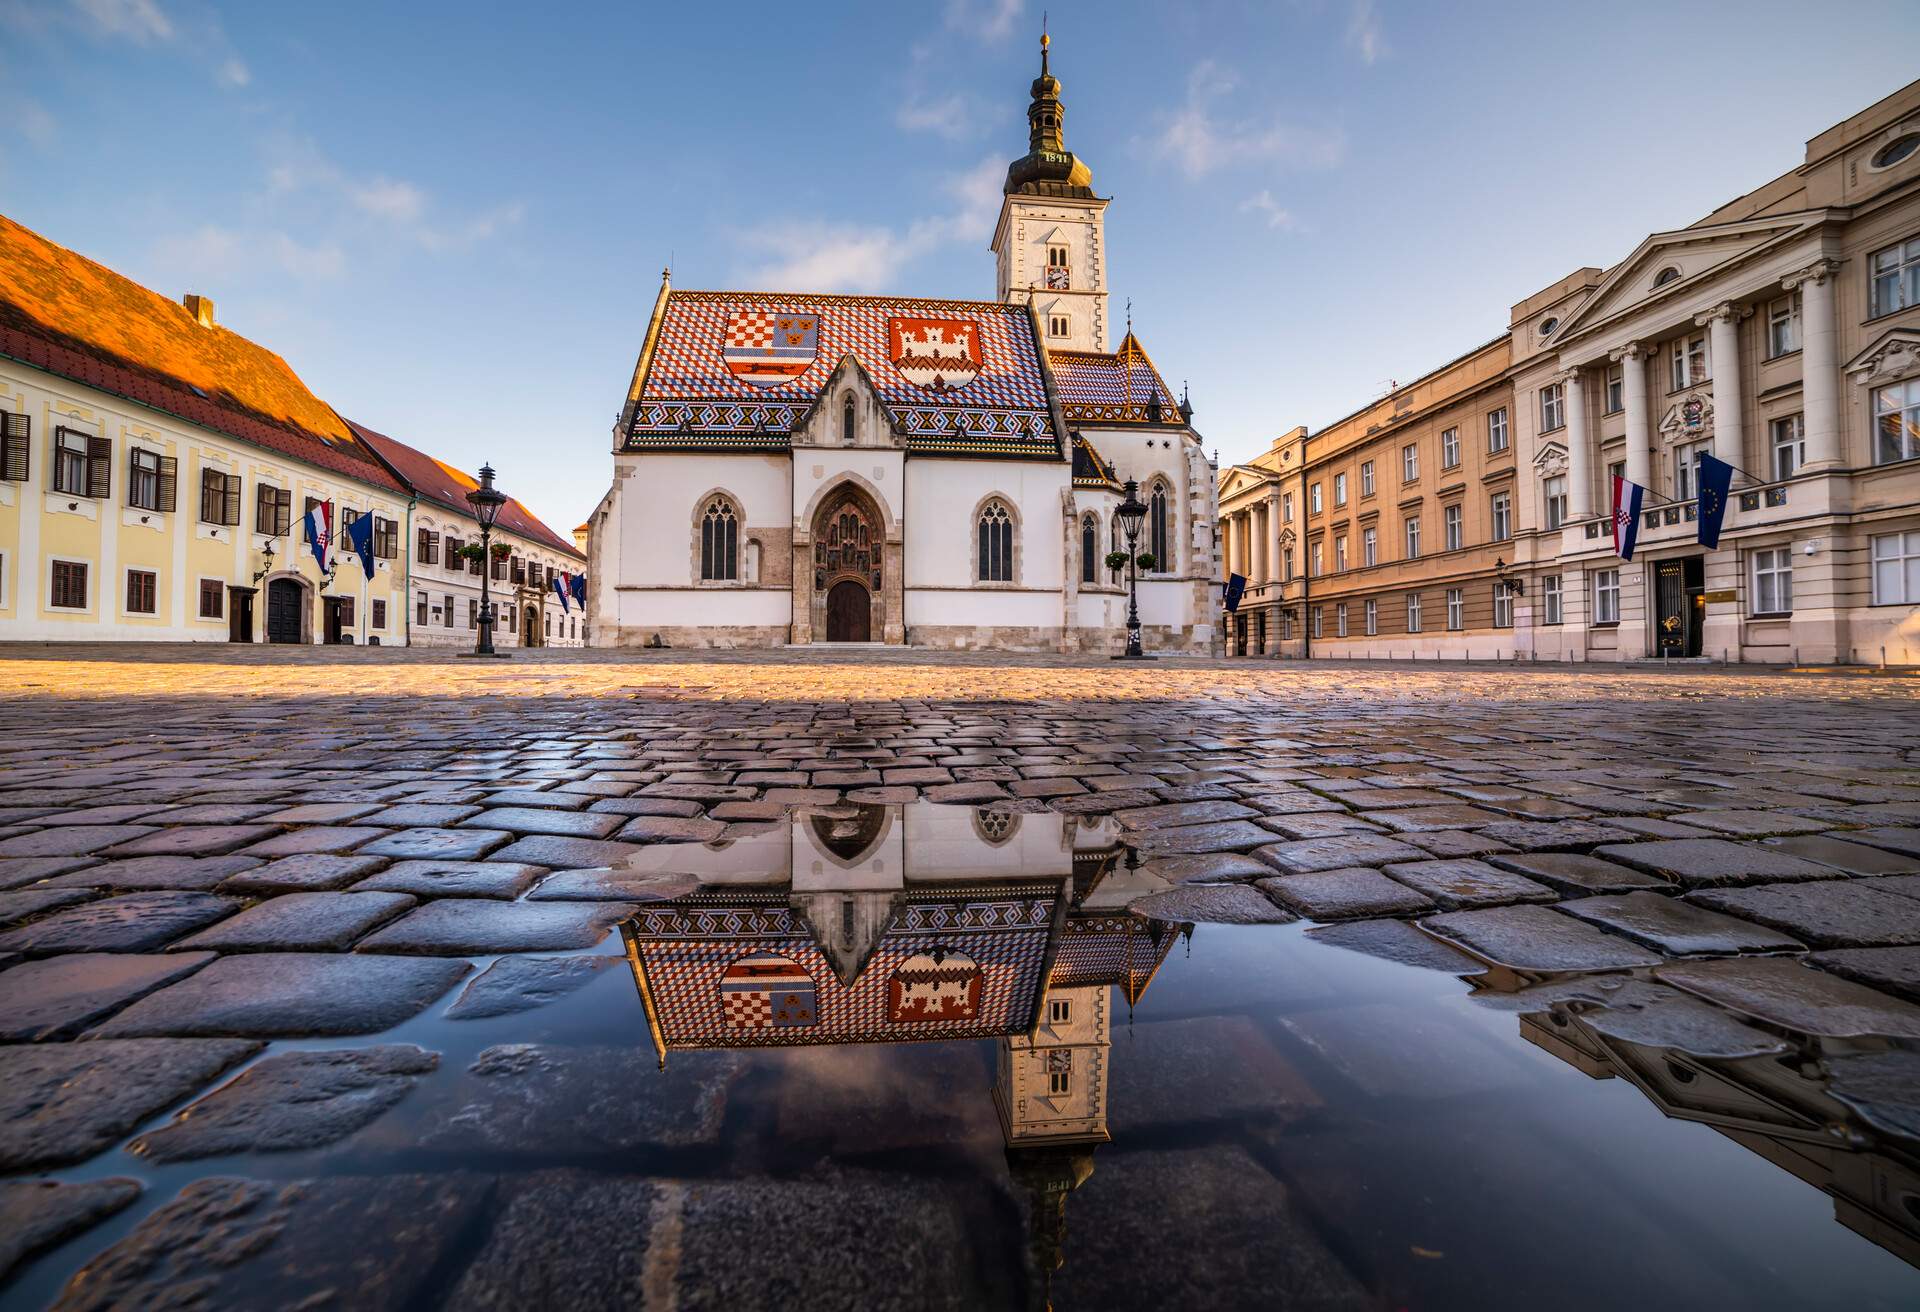 The Church of St. Mark is the parish church of old Zagreb, Croatia, located in St. Mark's Square.